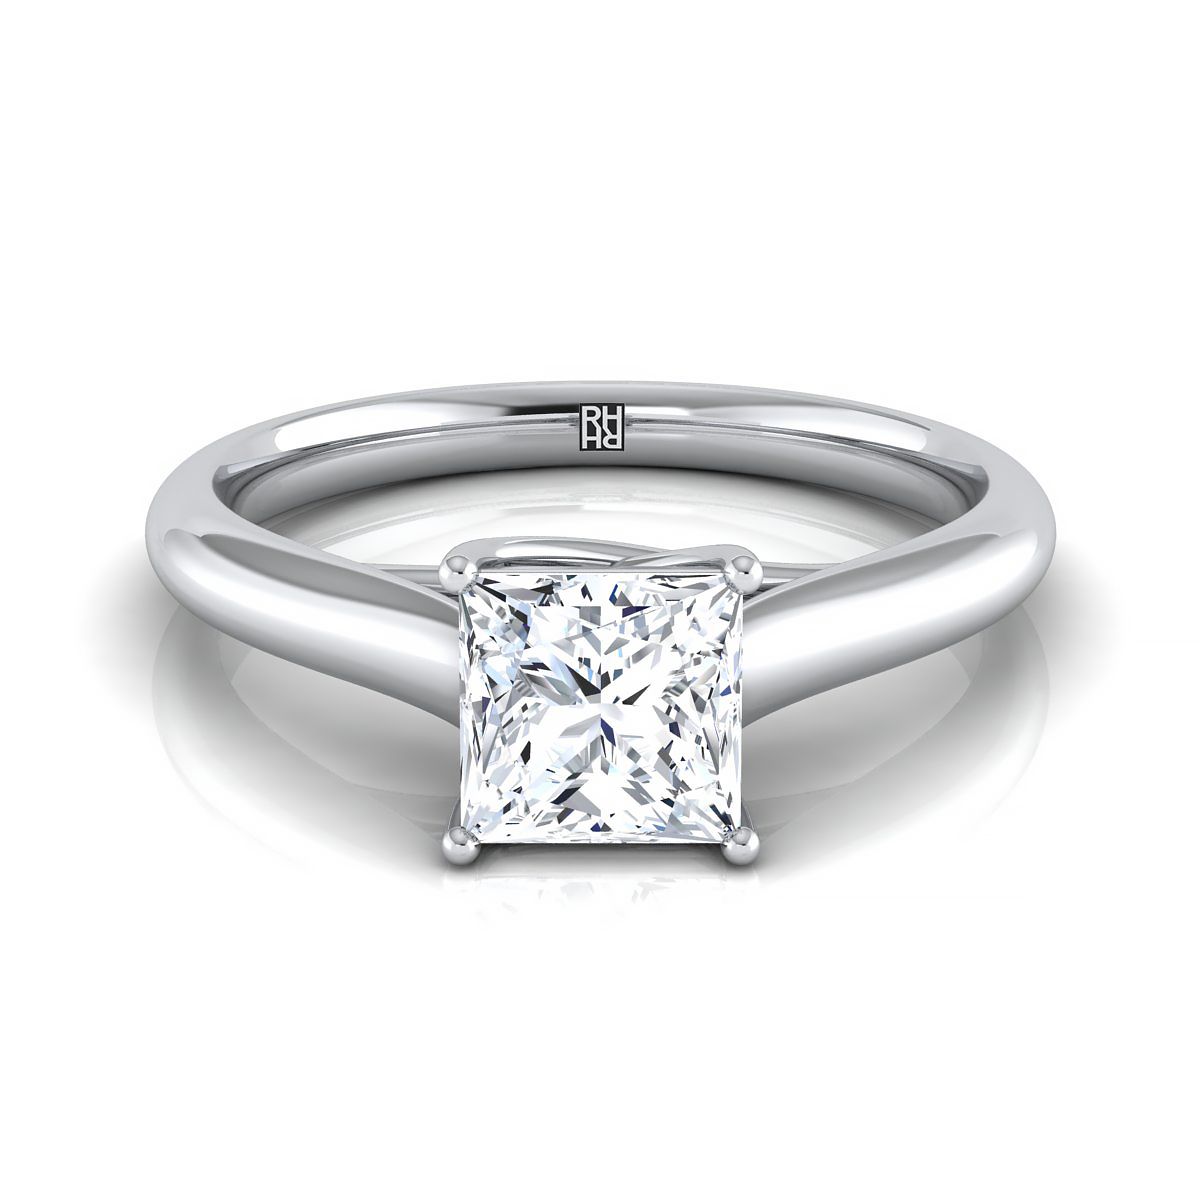 14K White Gold Princess Cut Rounded Classic Comfort Fit Solitaire Ring